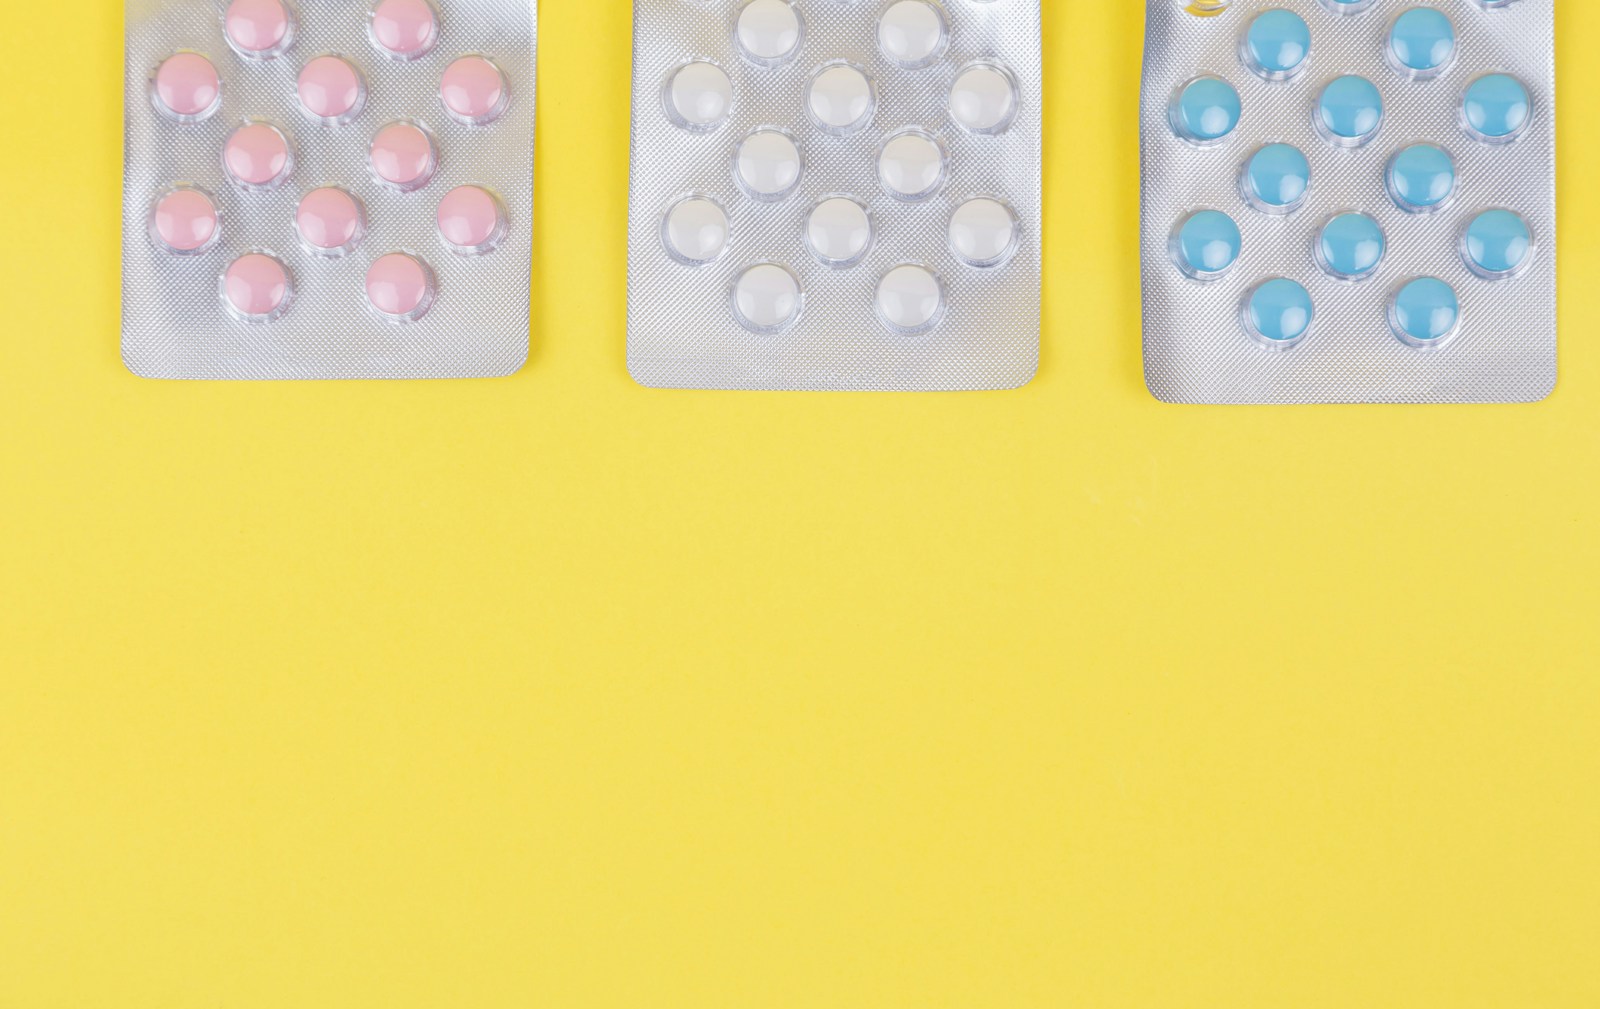 Opill: Everything You Need to Know About America’s First Ever Over-the-Counter Birth Control Pill